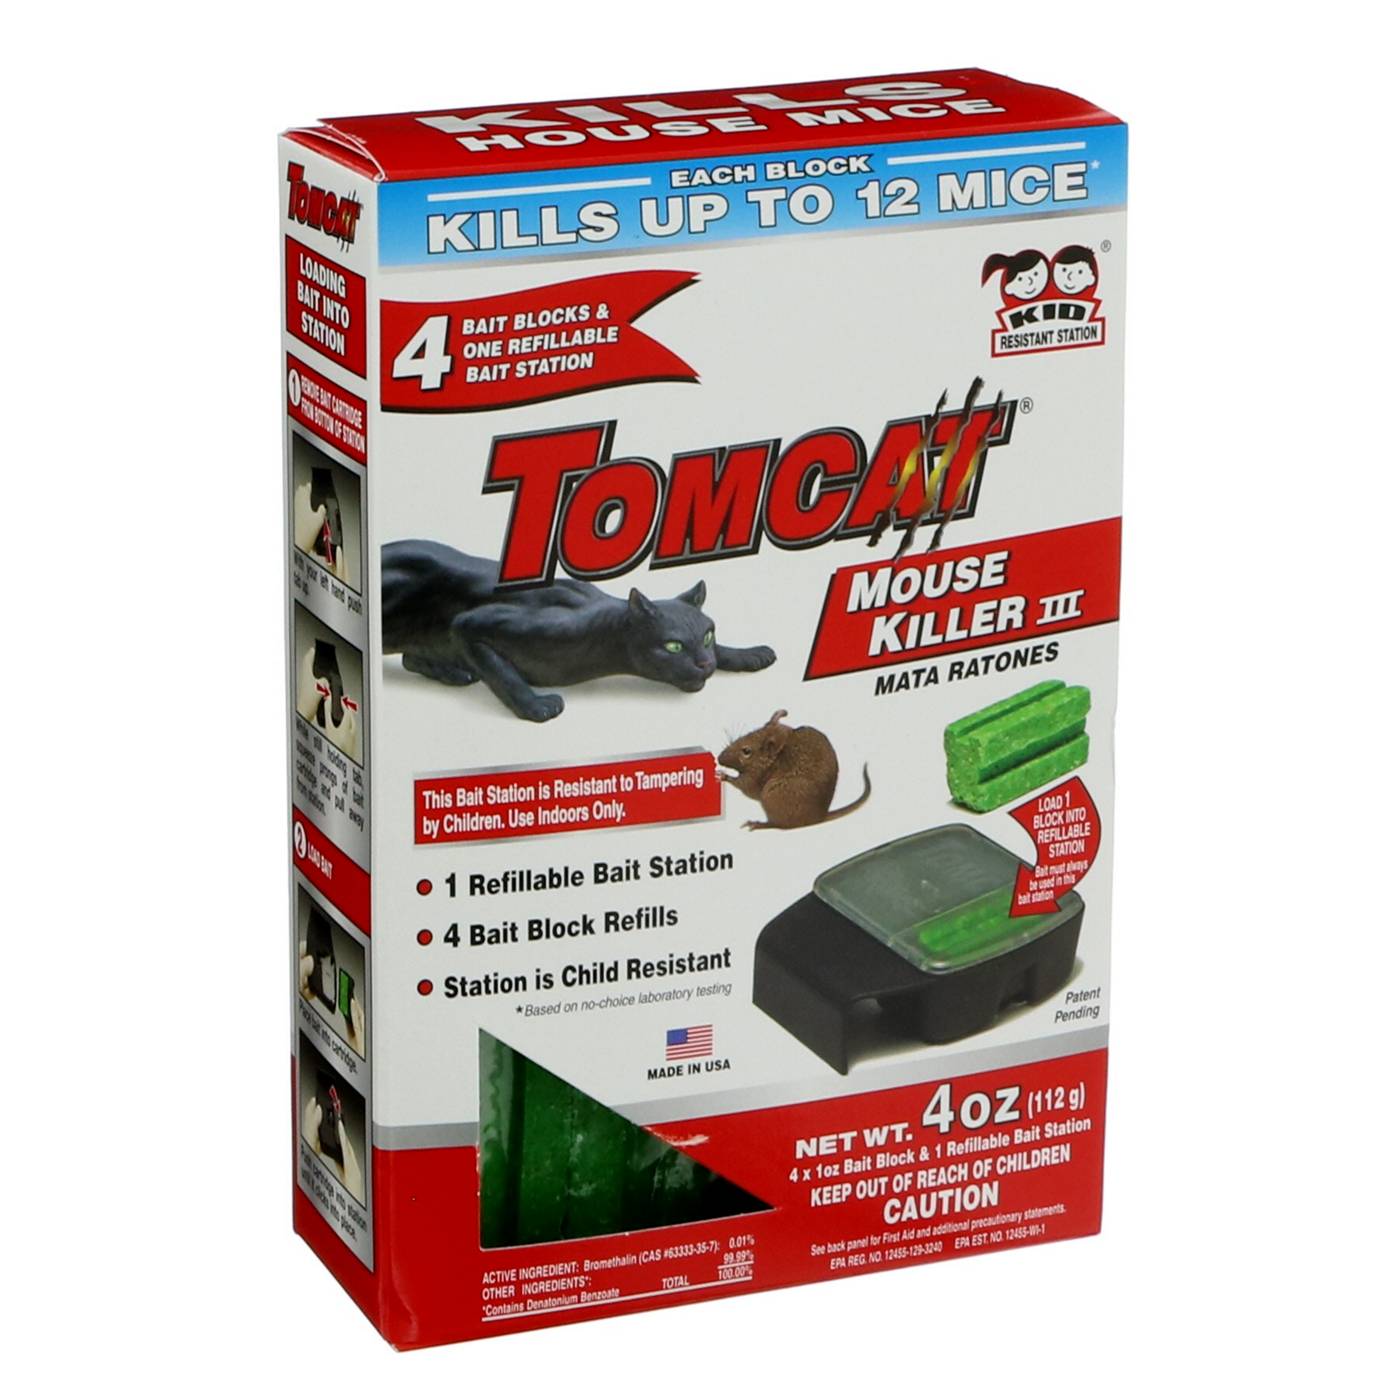 Tomcat Mouse Glue Trap W/Eugenol - 8 Pack